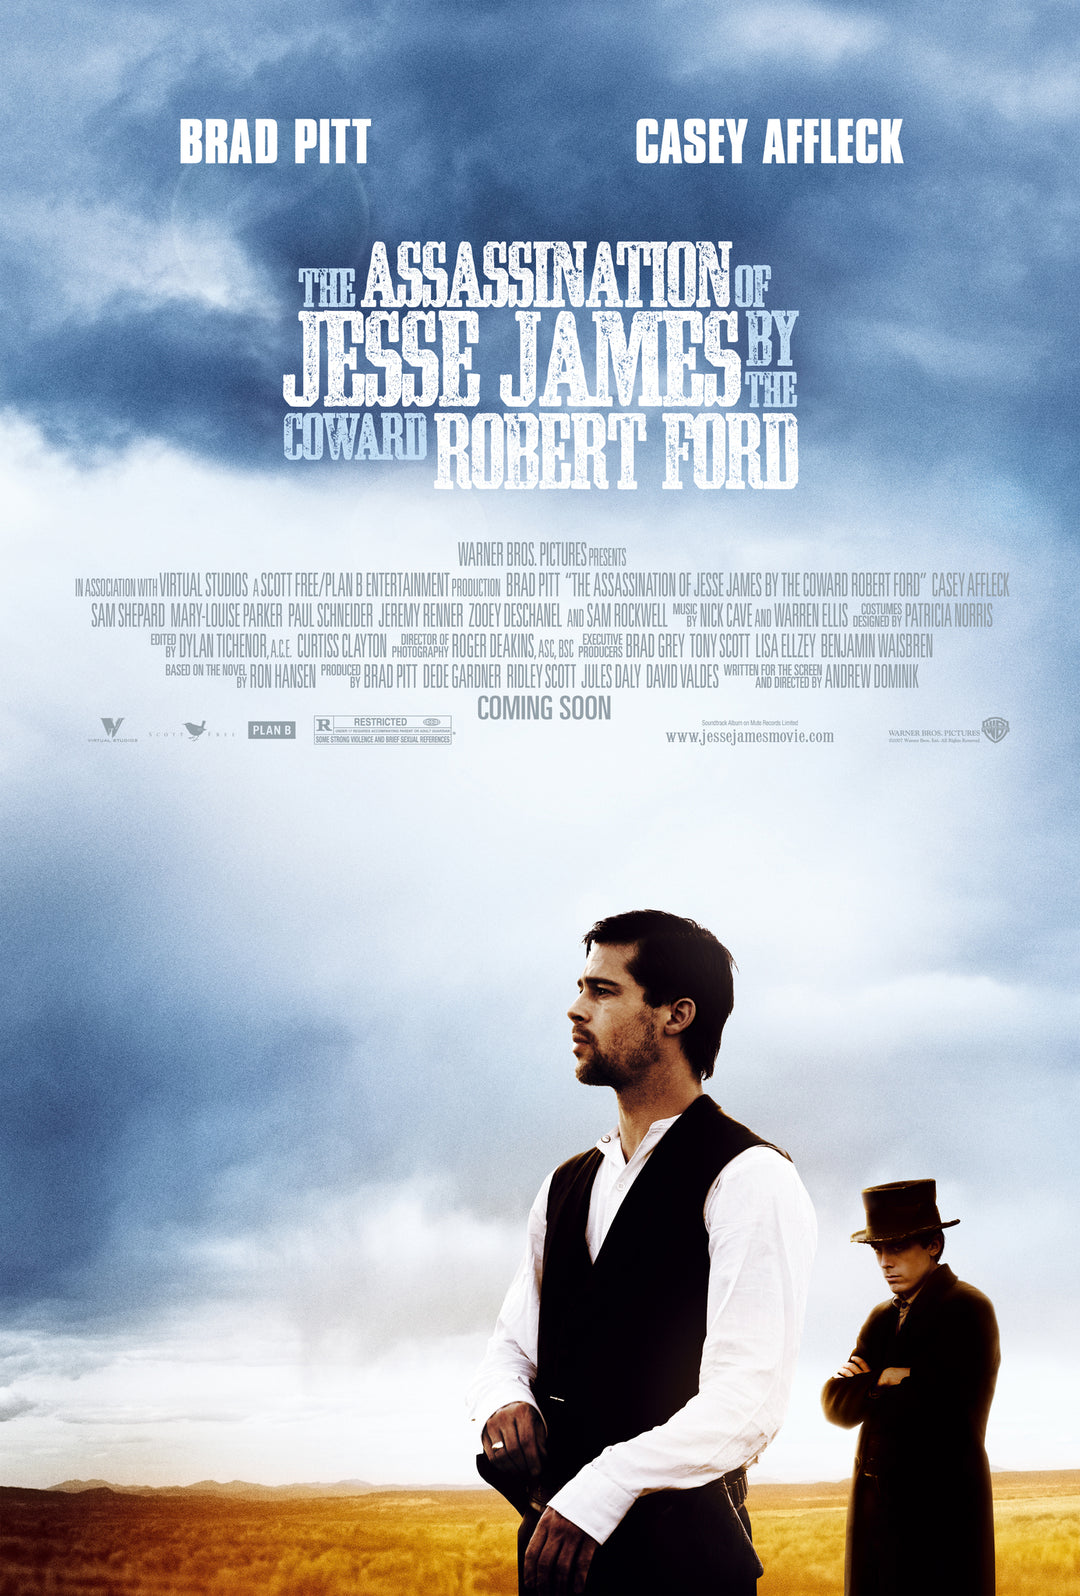 The Assassination of Jesse James by the Coward Robert Ford - Western/Drama [DVD]